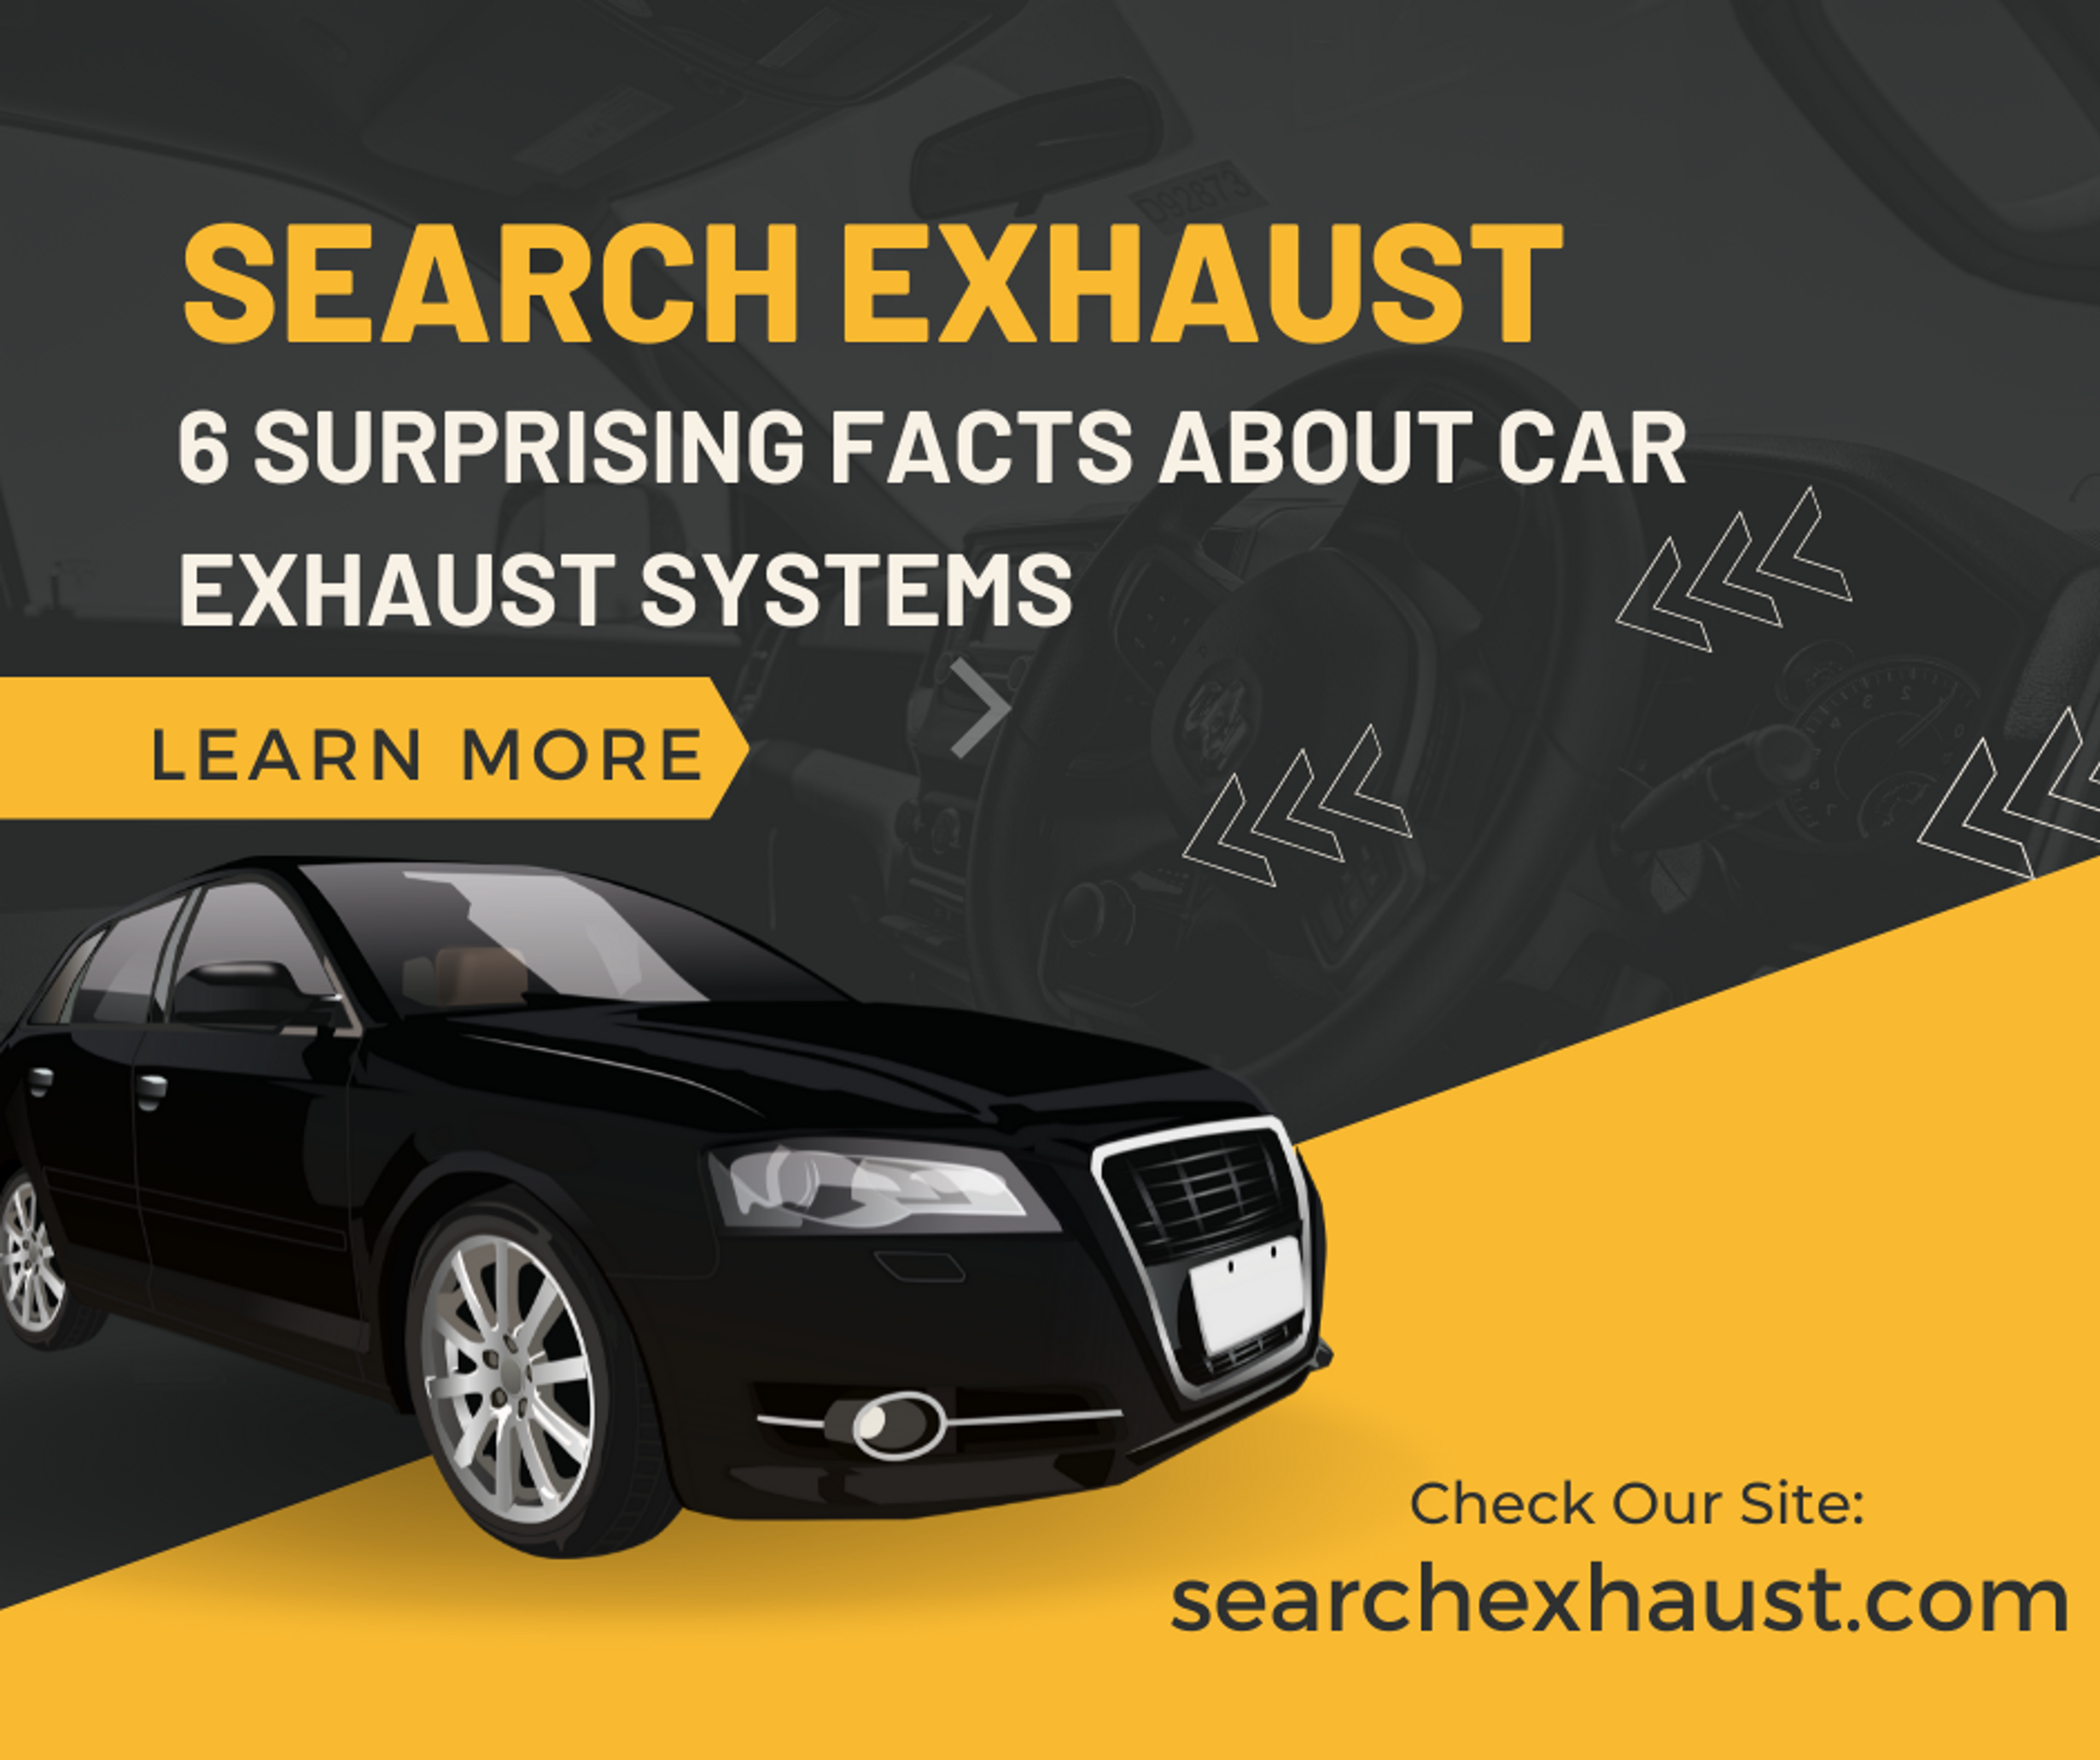 6 Surprising Facts About Car Exhaust Systems